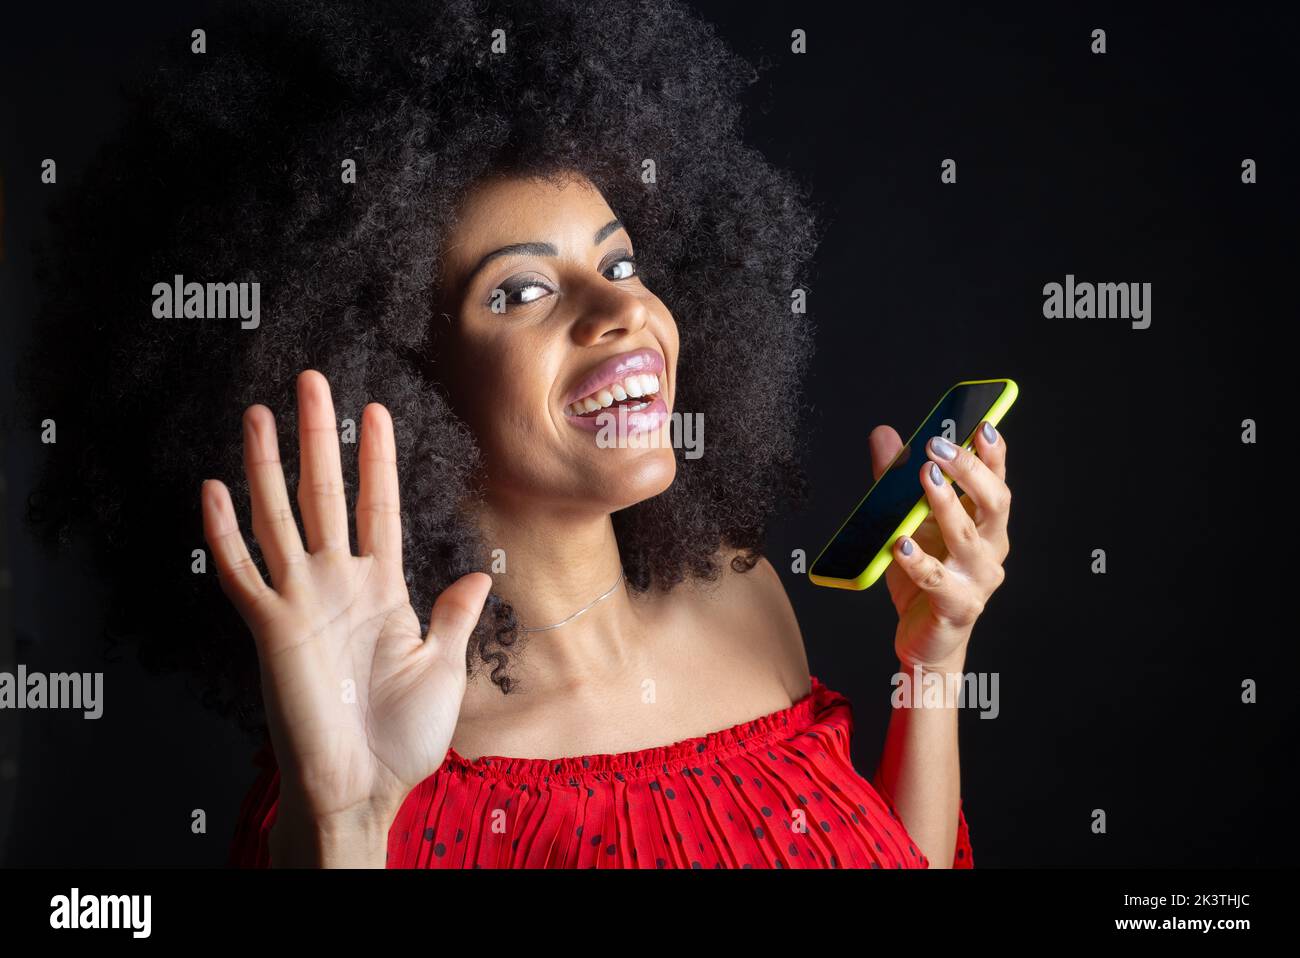 Young cheerful ethnic female with cellphone and Afro hairstyle saying hi with raised hand while looking at camera Stock Photo